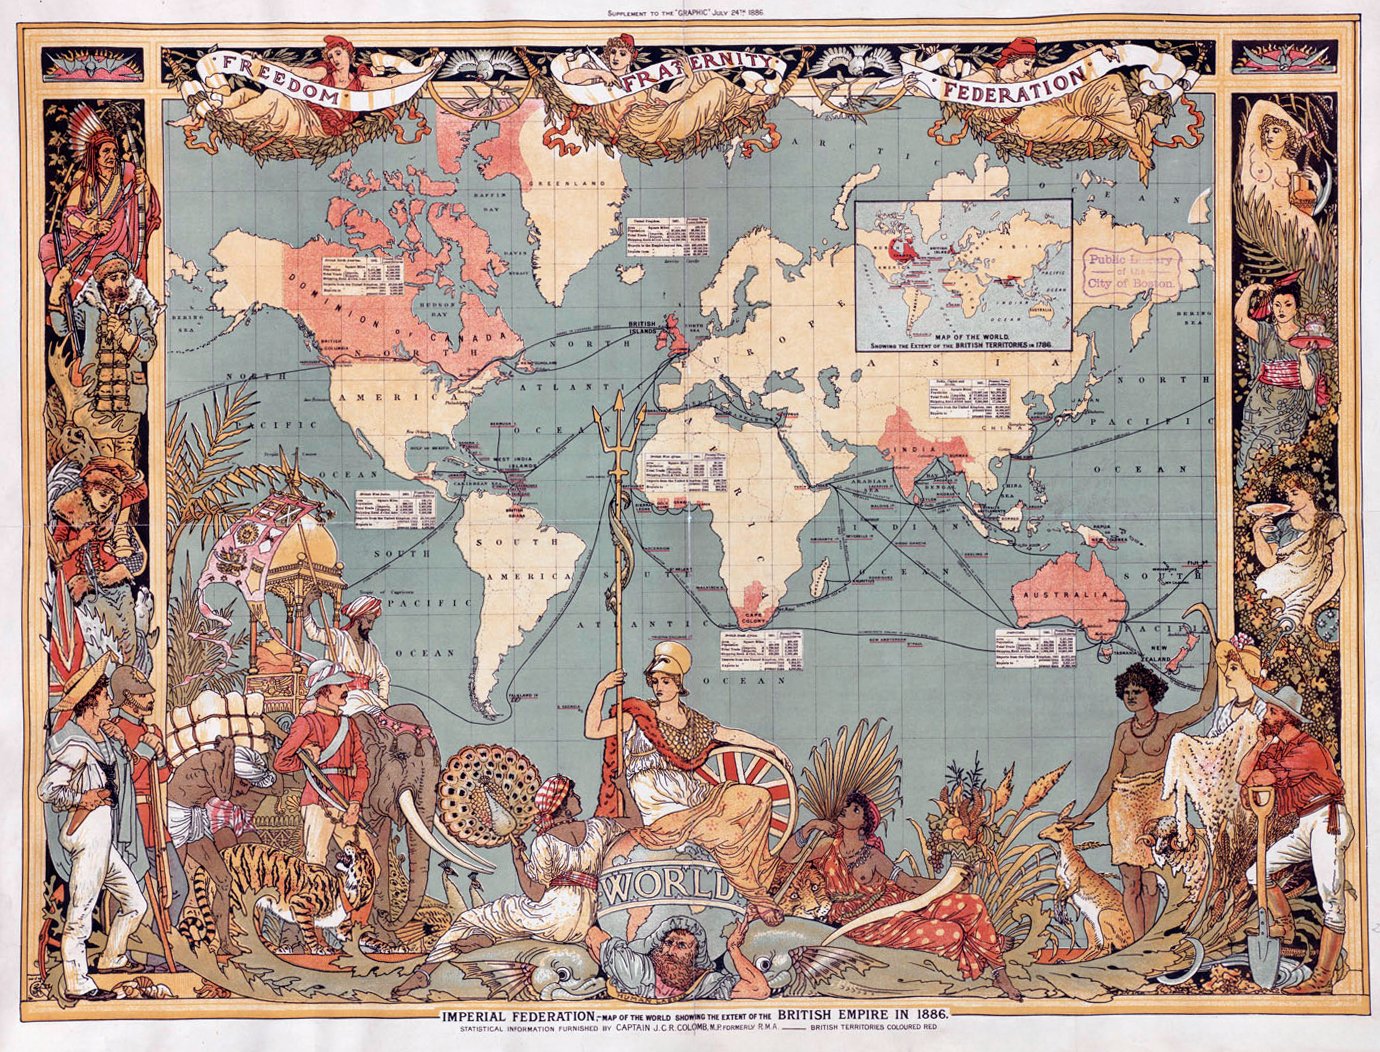 A map of the world from 1886 showing the extent of the British Empire in pink. The map is bordered by illustrations of people and animals from different regions of the world, such as Africa, Asia, Australia, and America.